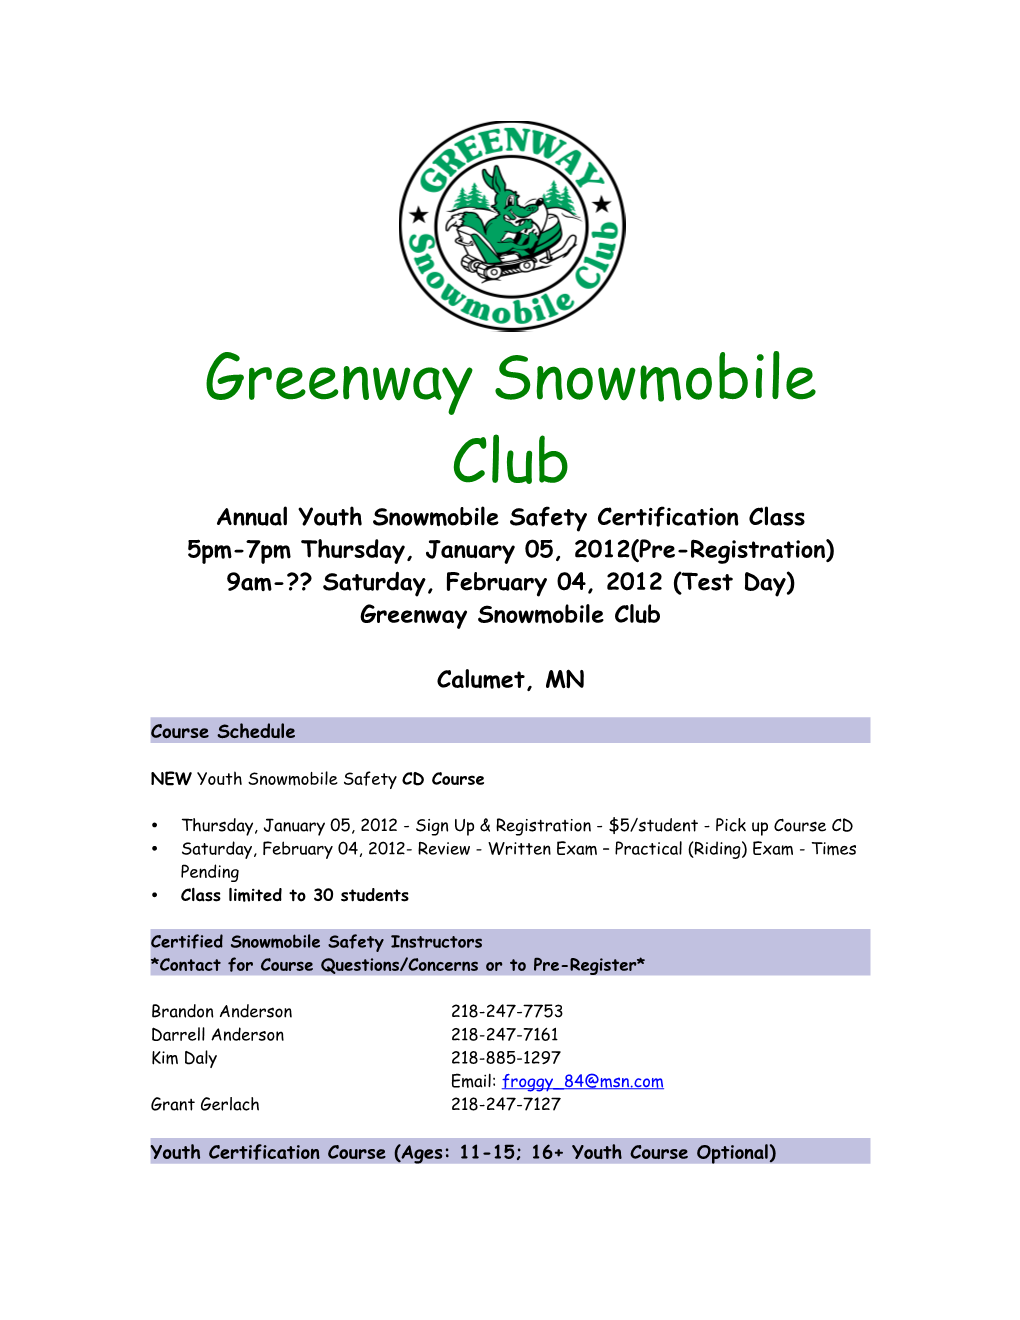 Annual Youth Snowmobile Safety Certification Class